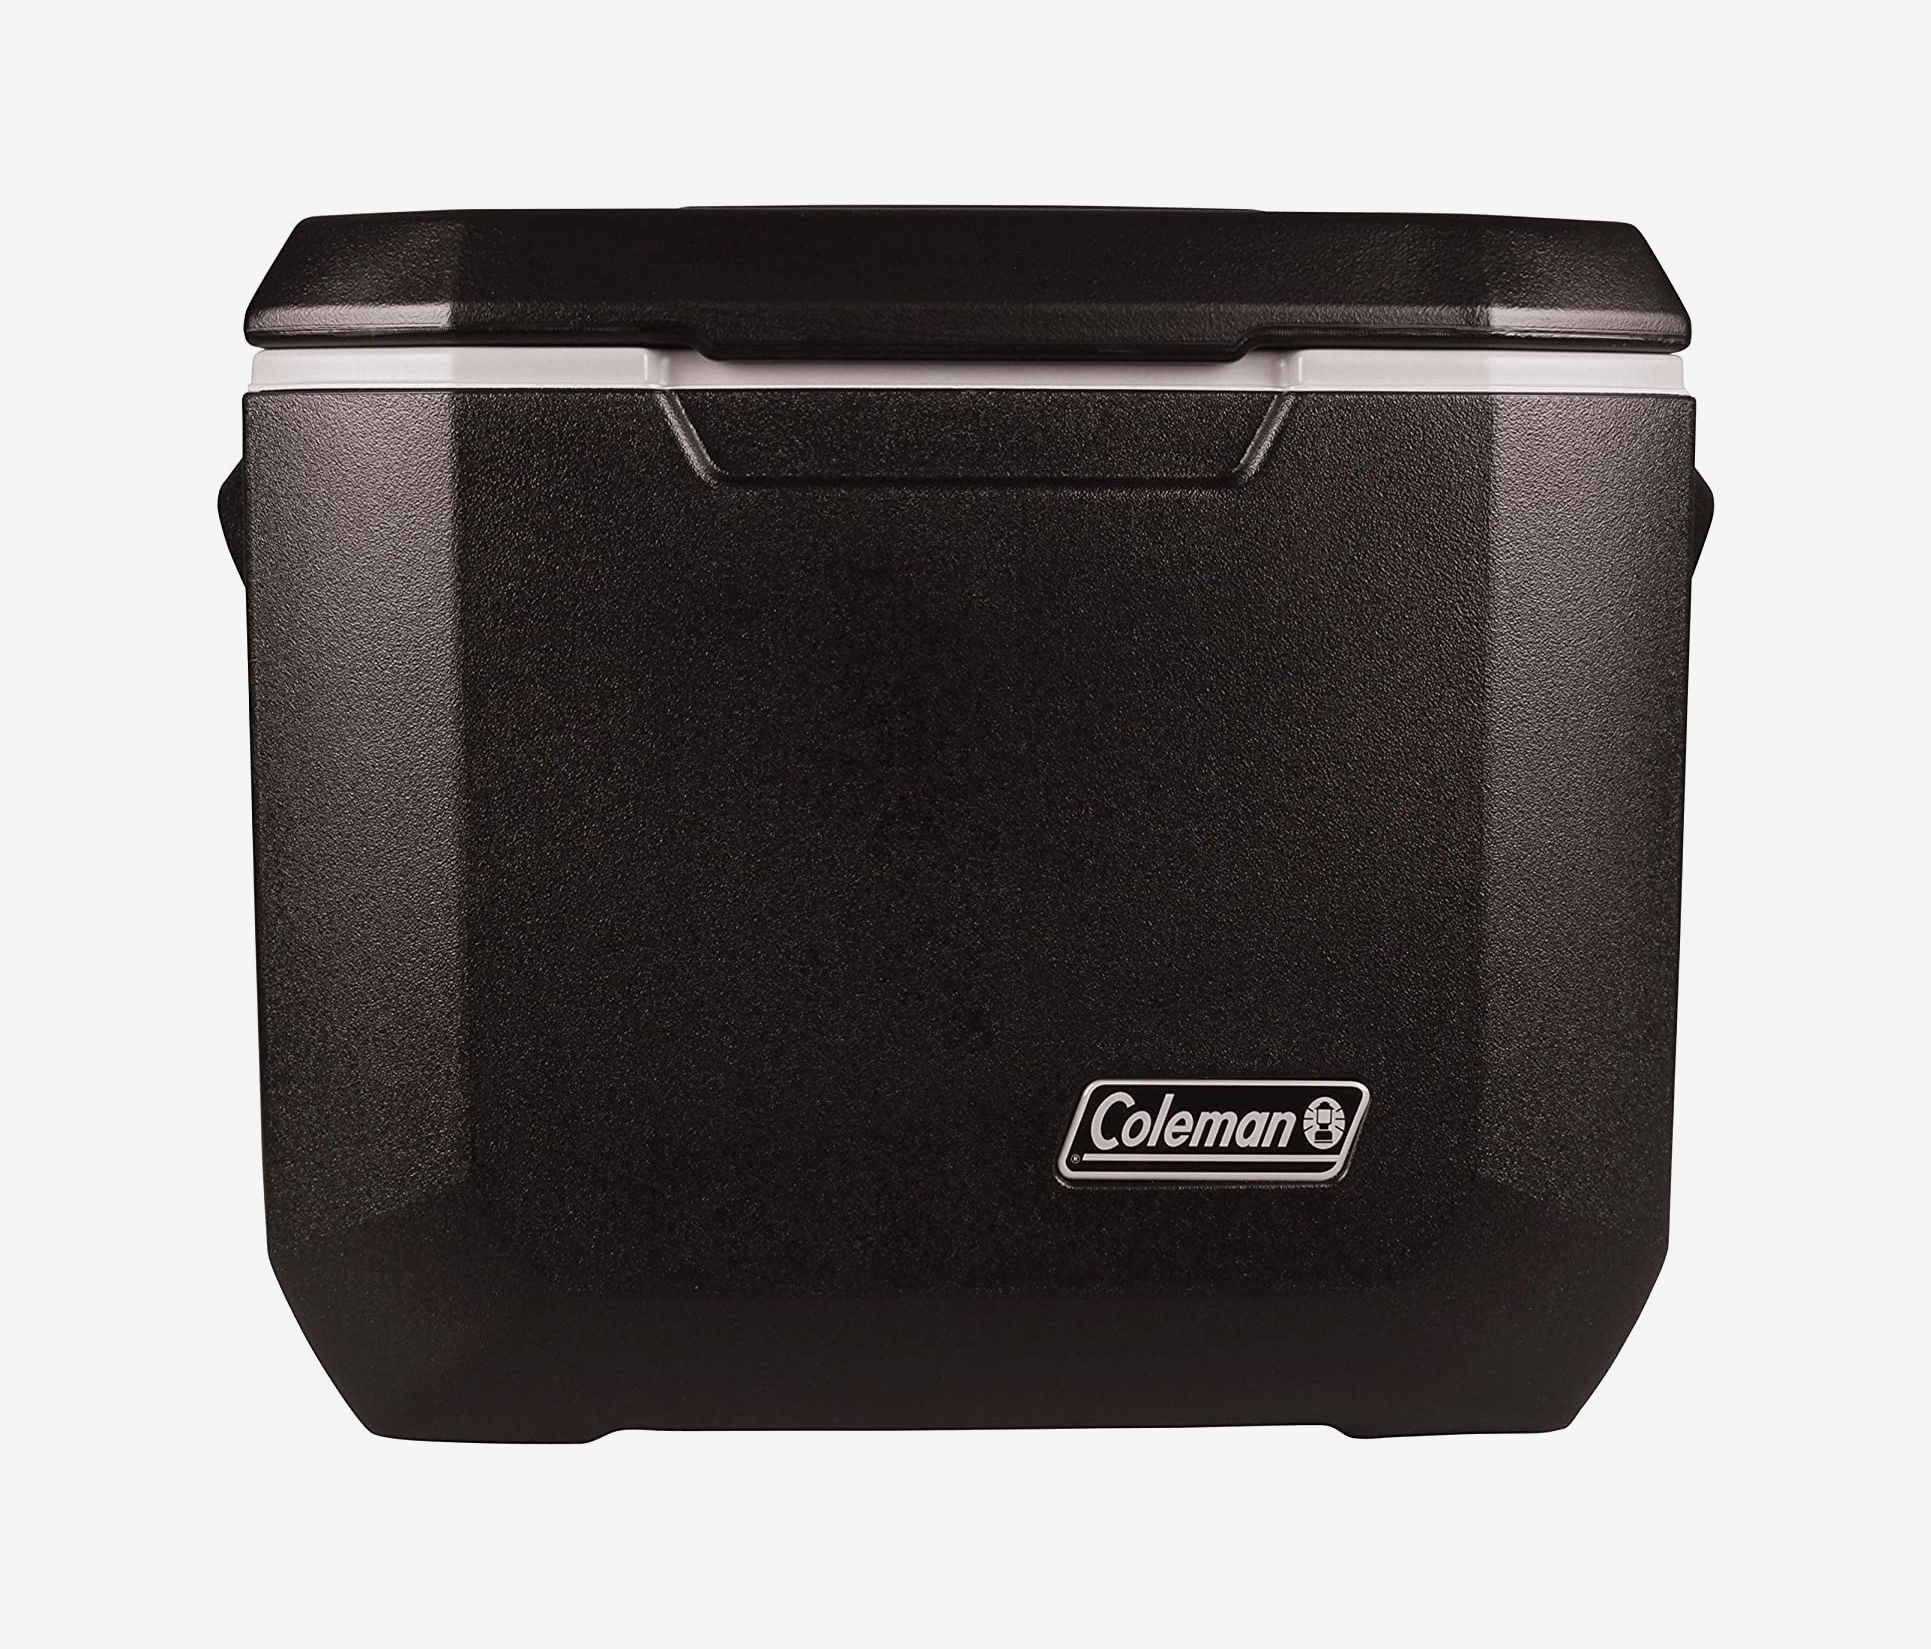 The 12 best coolers for 2023, according to experts